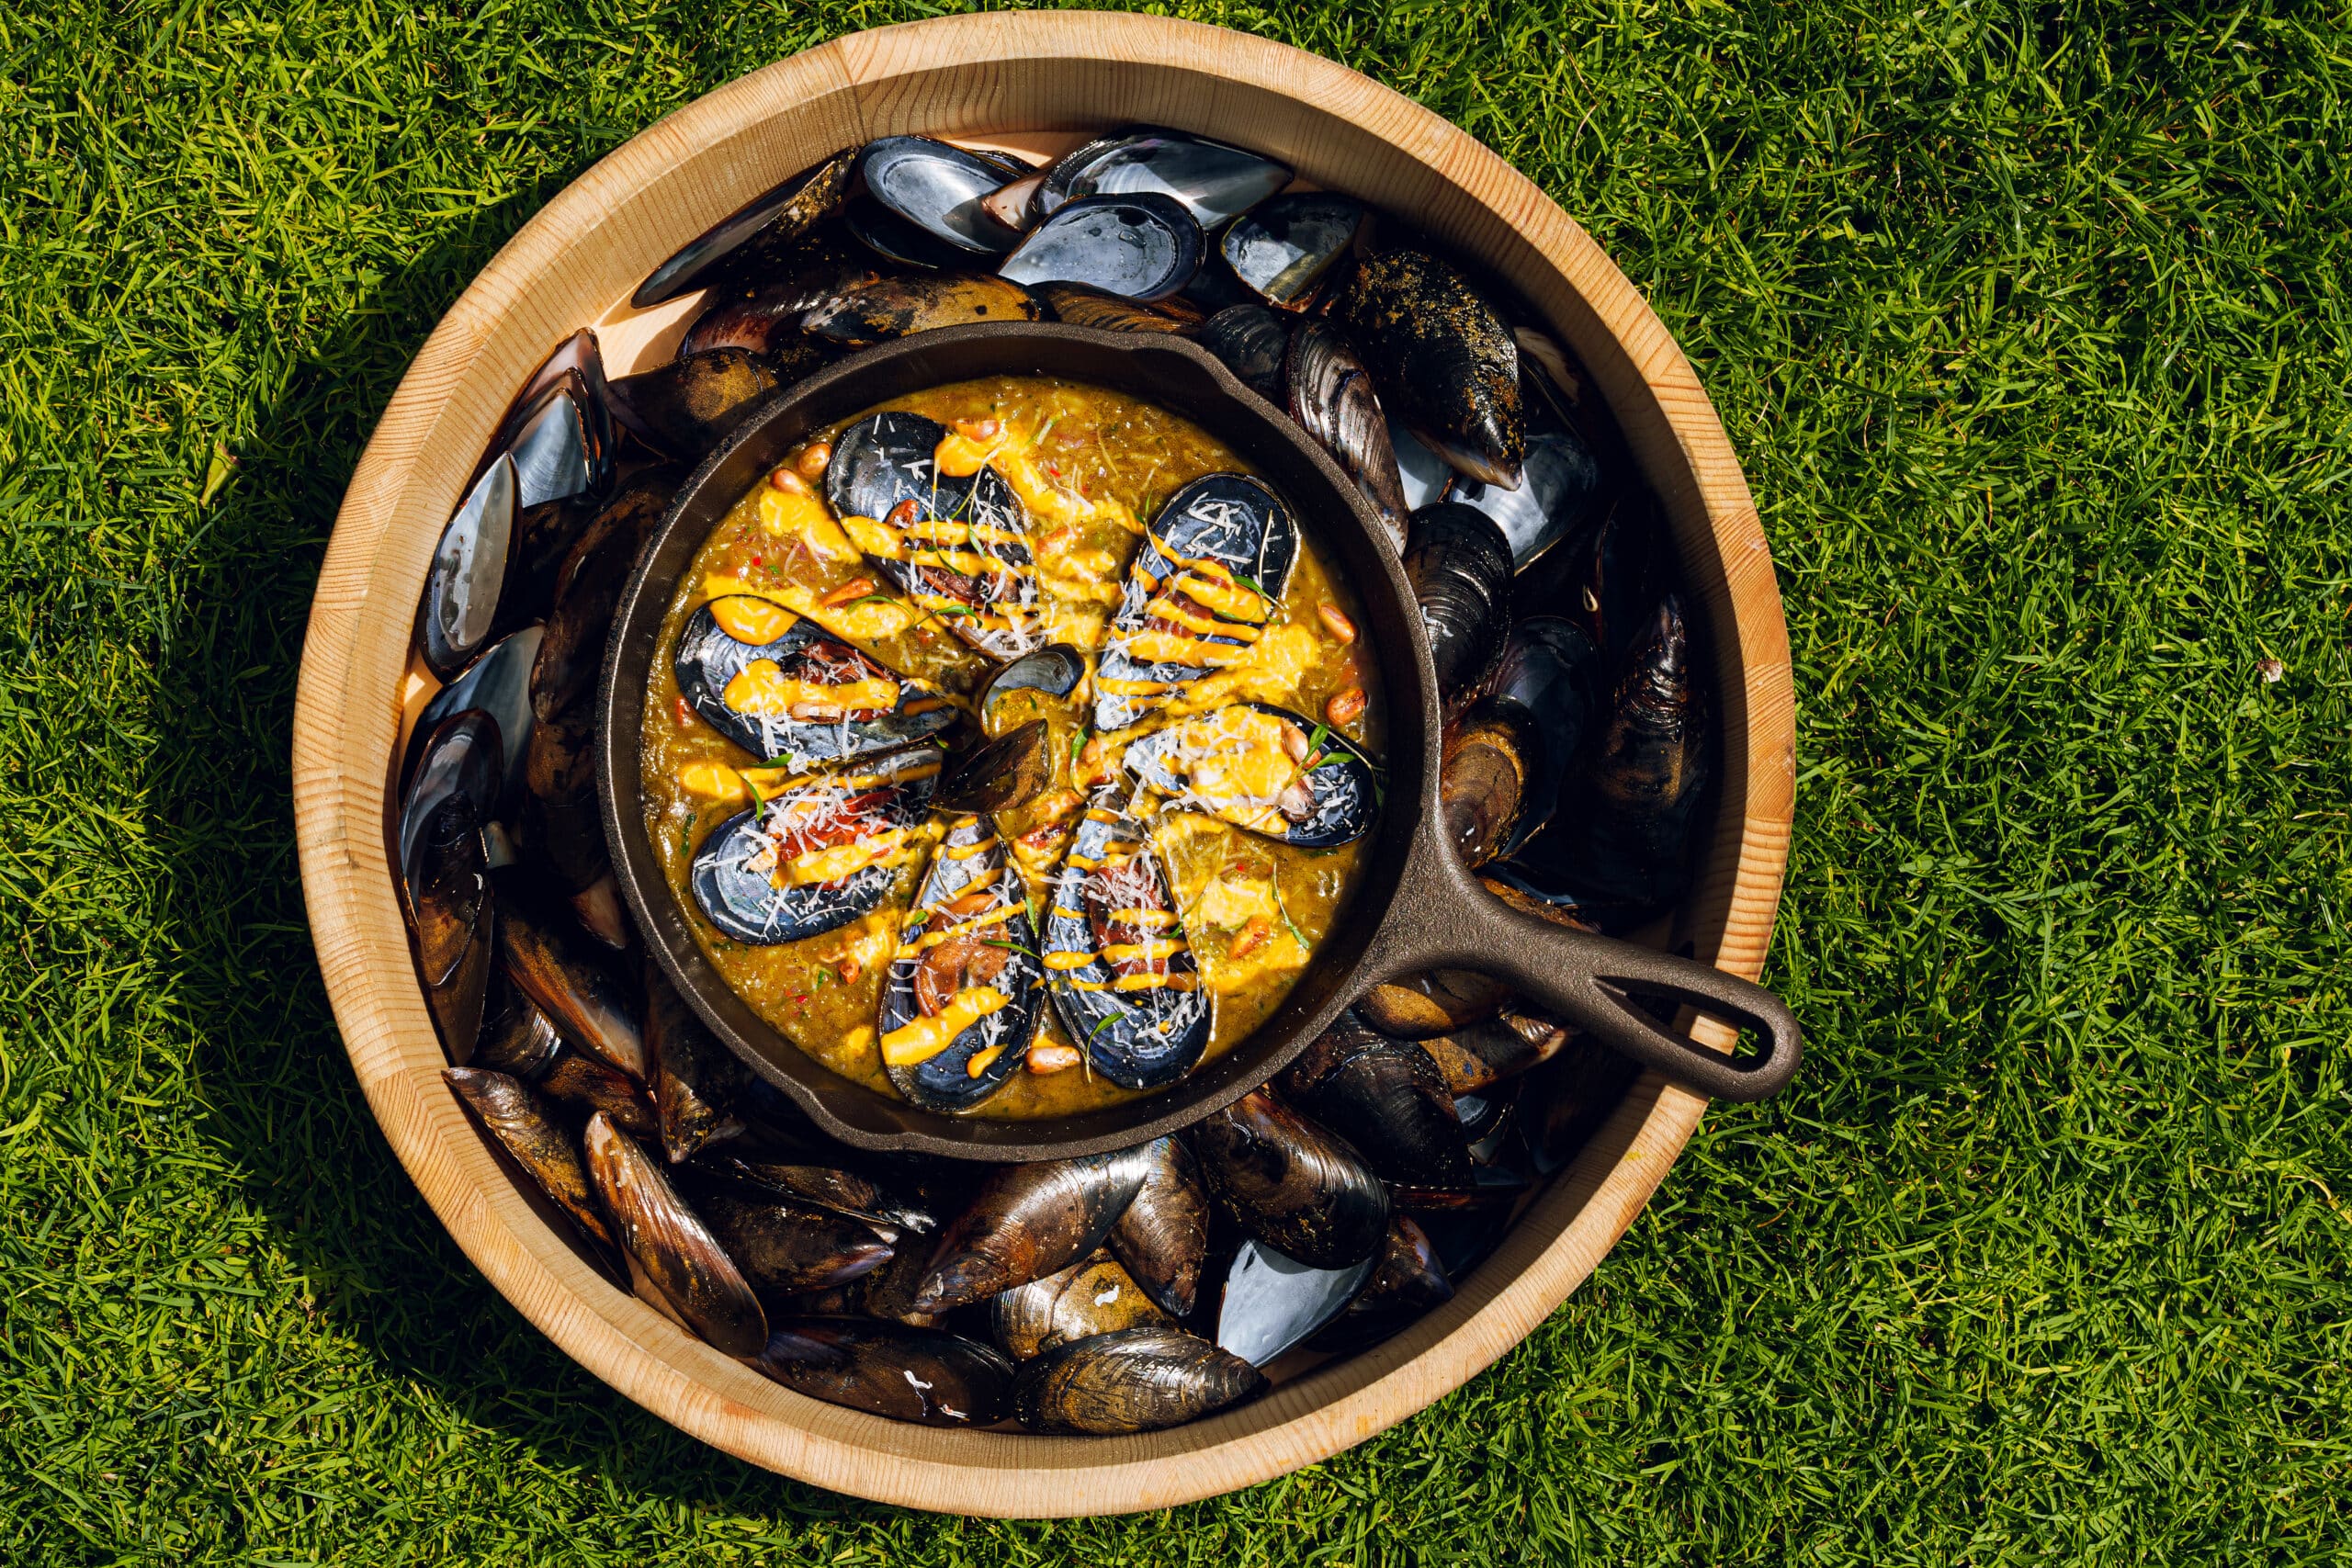 PLAYA DUBAI LAUNCHES LIMITED-TIME DISCOVERY MENU